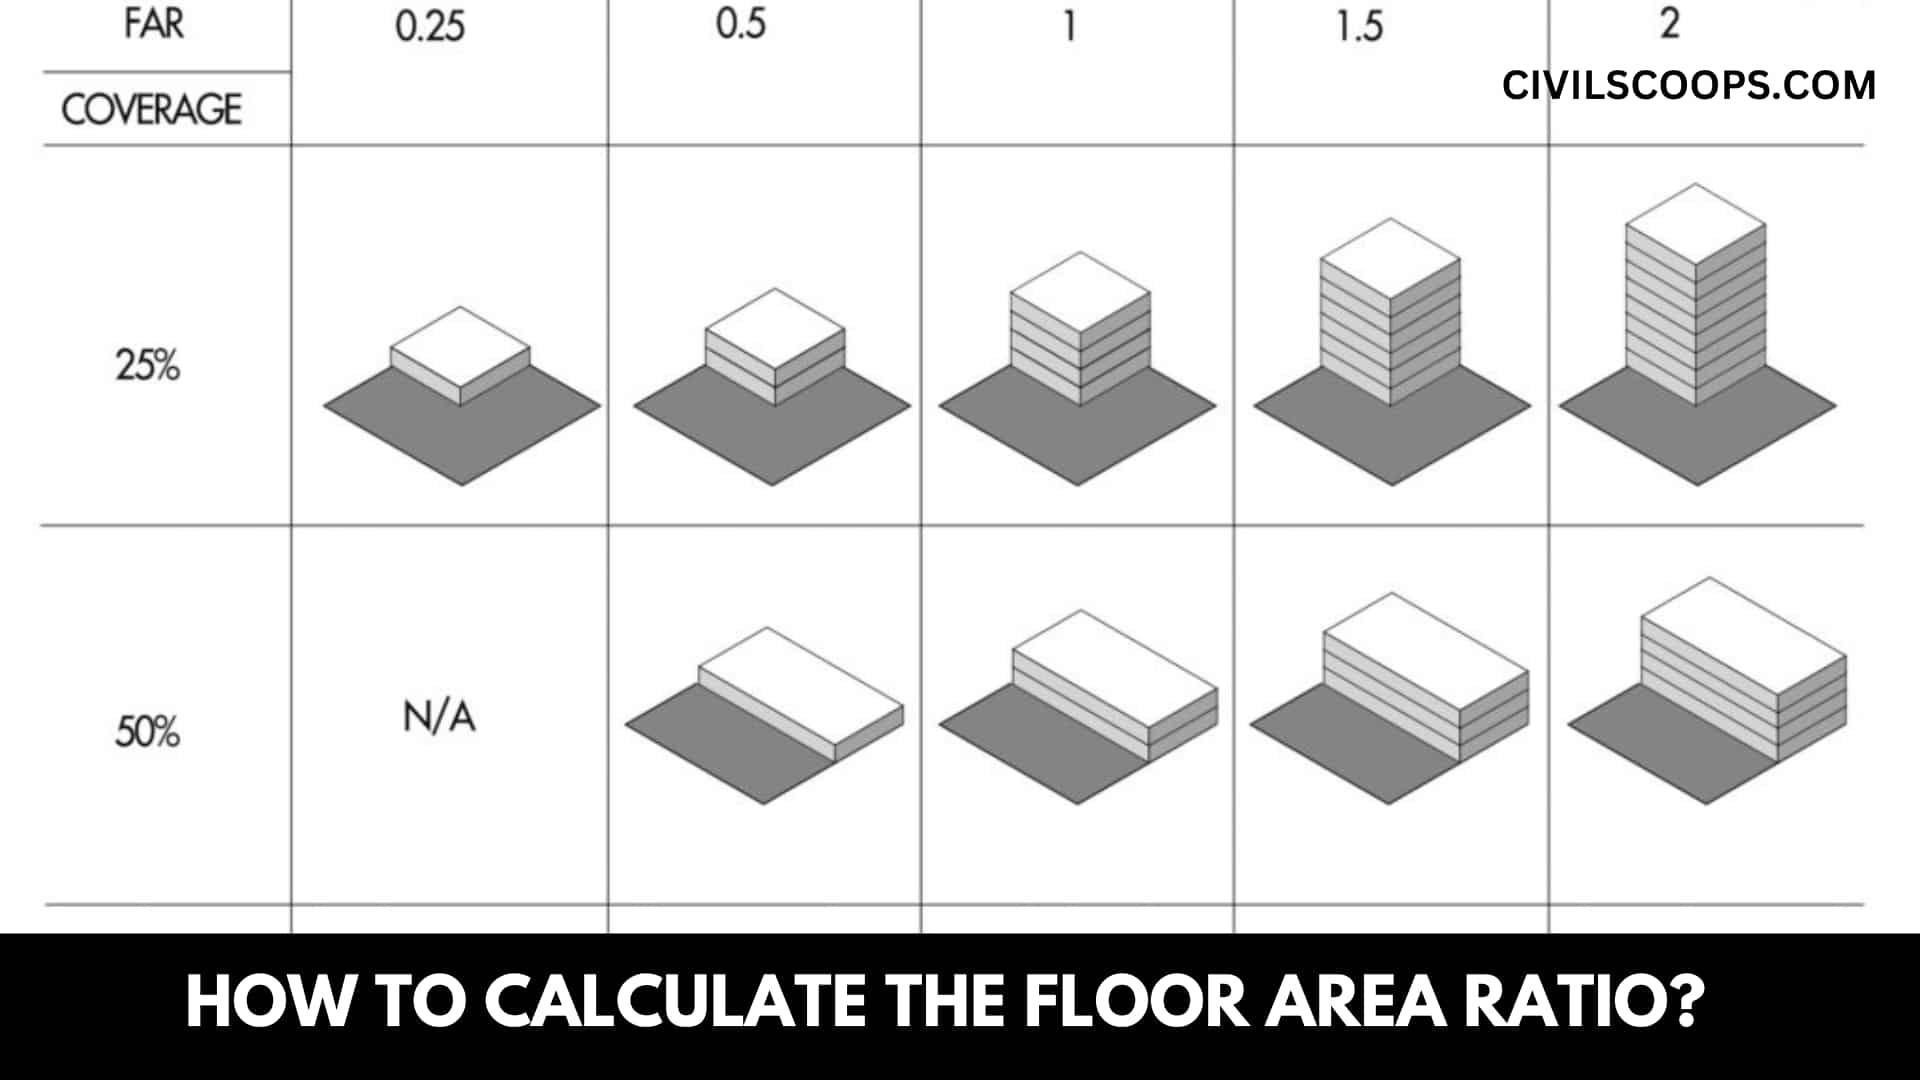 How to Calculate the Floor Area Ratio